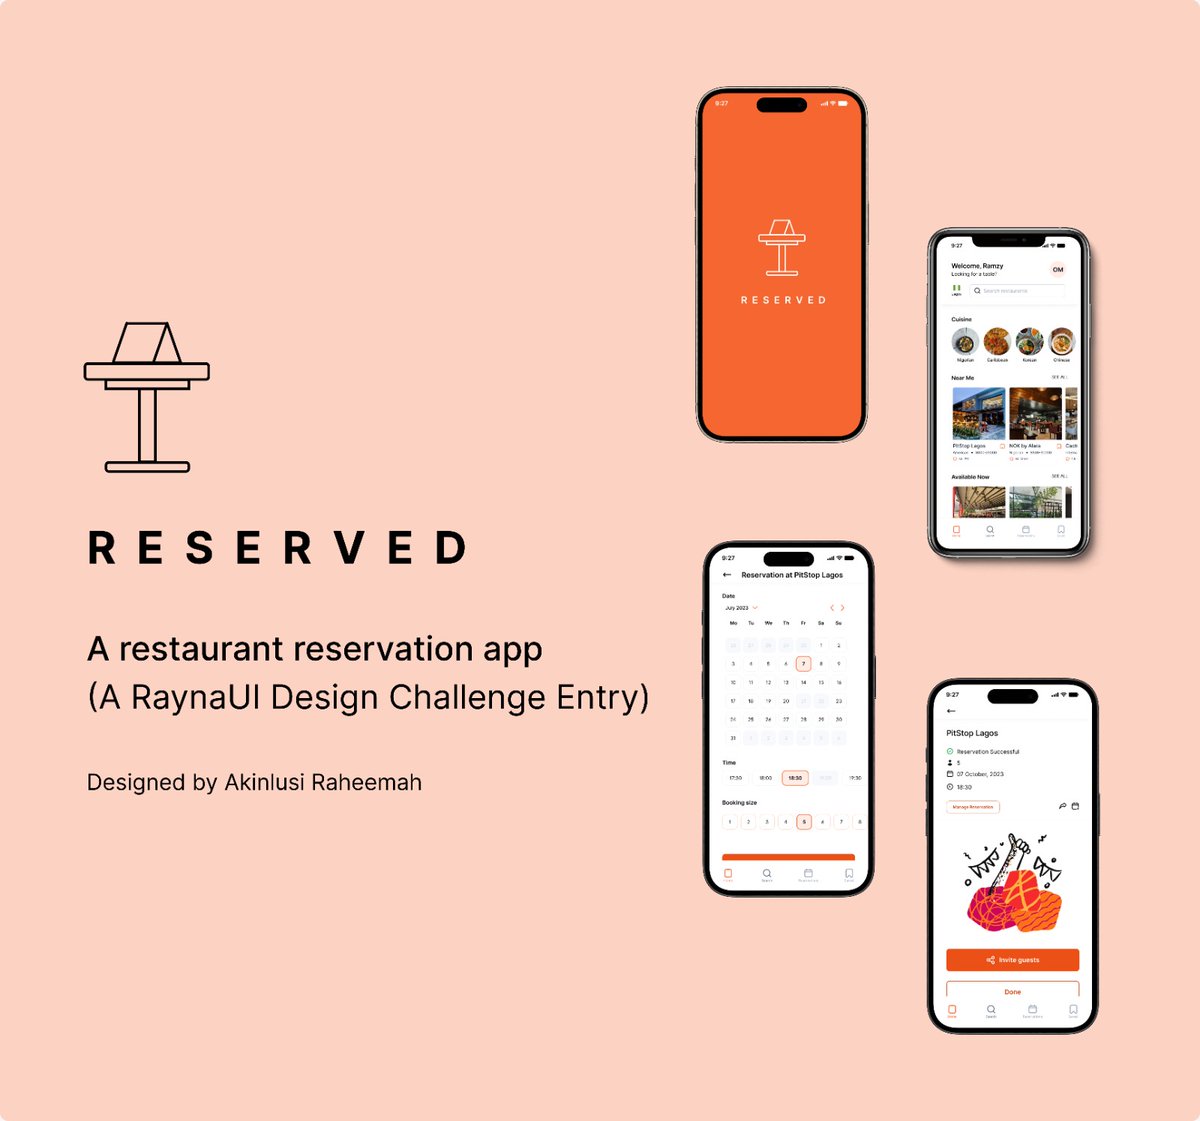 My #RaynaUIShowdown challenge entry. 

A restaurant booking app called: RESERVED. Where you can easily make restaurant reservations suited to your location and preferred cuisine at the tip of your fingers.

#designclan #designclanchallenge